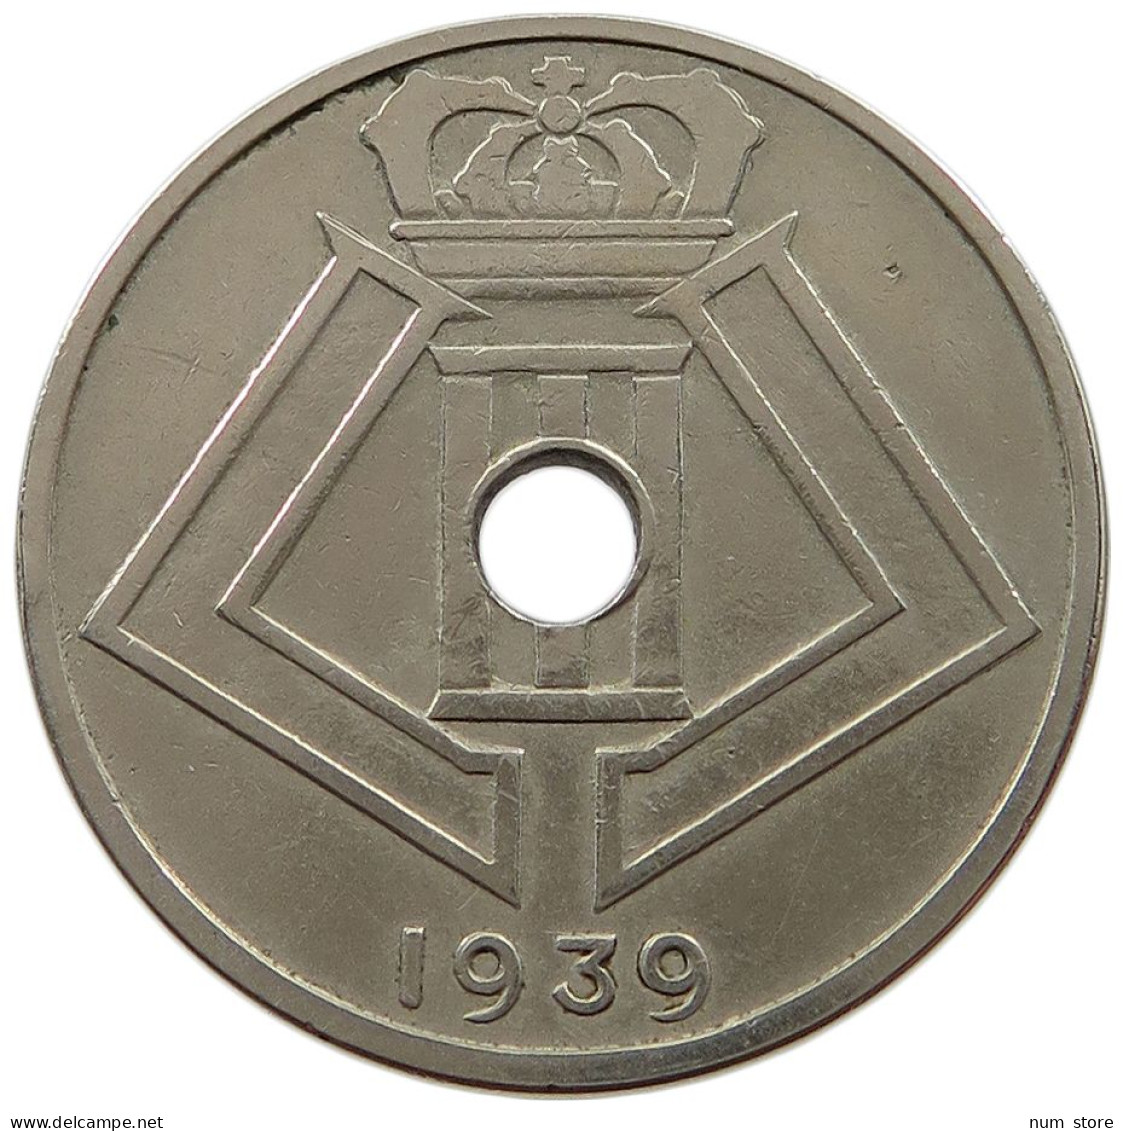 BELGIUM 25 CENTIMES 1939 MINTING ERROR MEDAL ALIGNMENT 25 CENTIMES 1939 #t065 0183 - 25 Centimes